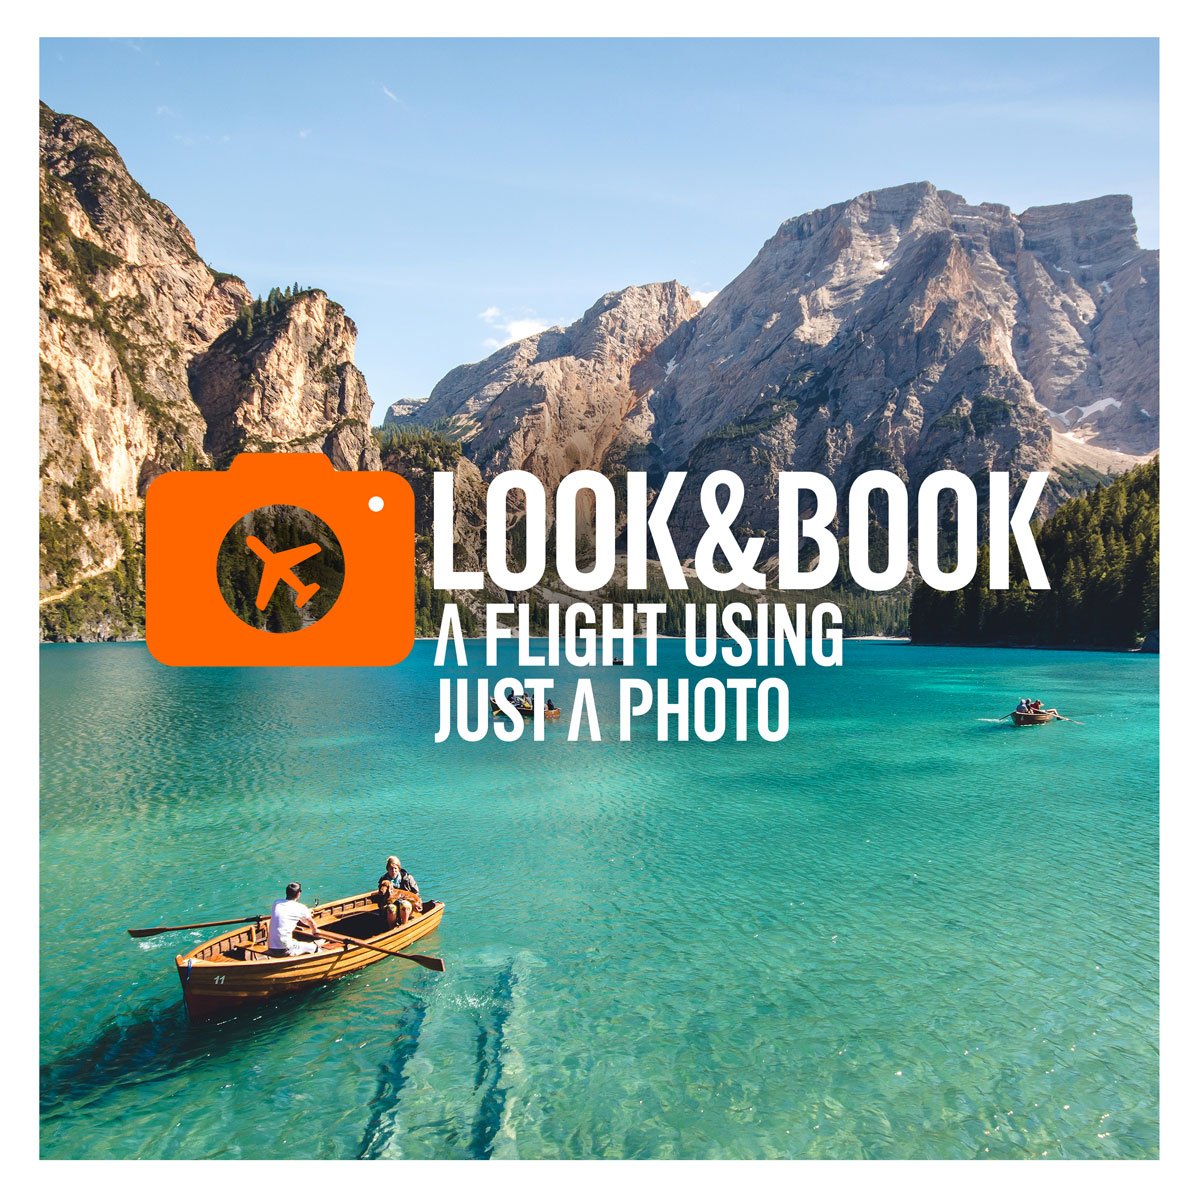 Look&Book-A-Flight-Using-Just-A-Photo-Italy-Logo